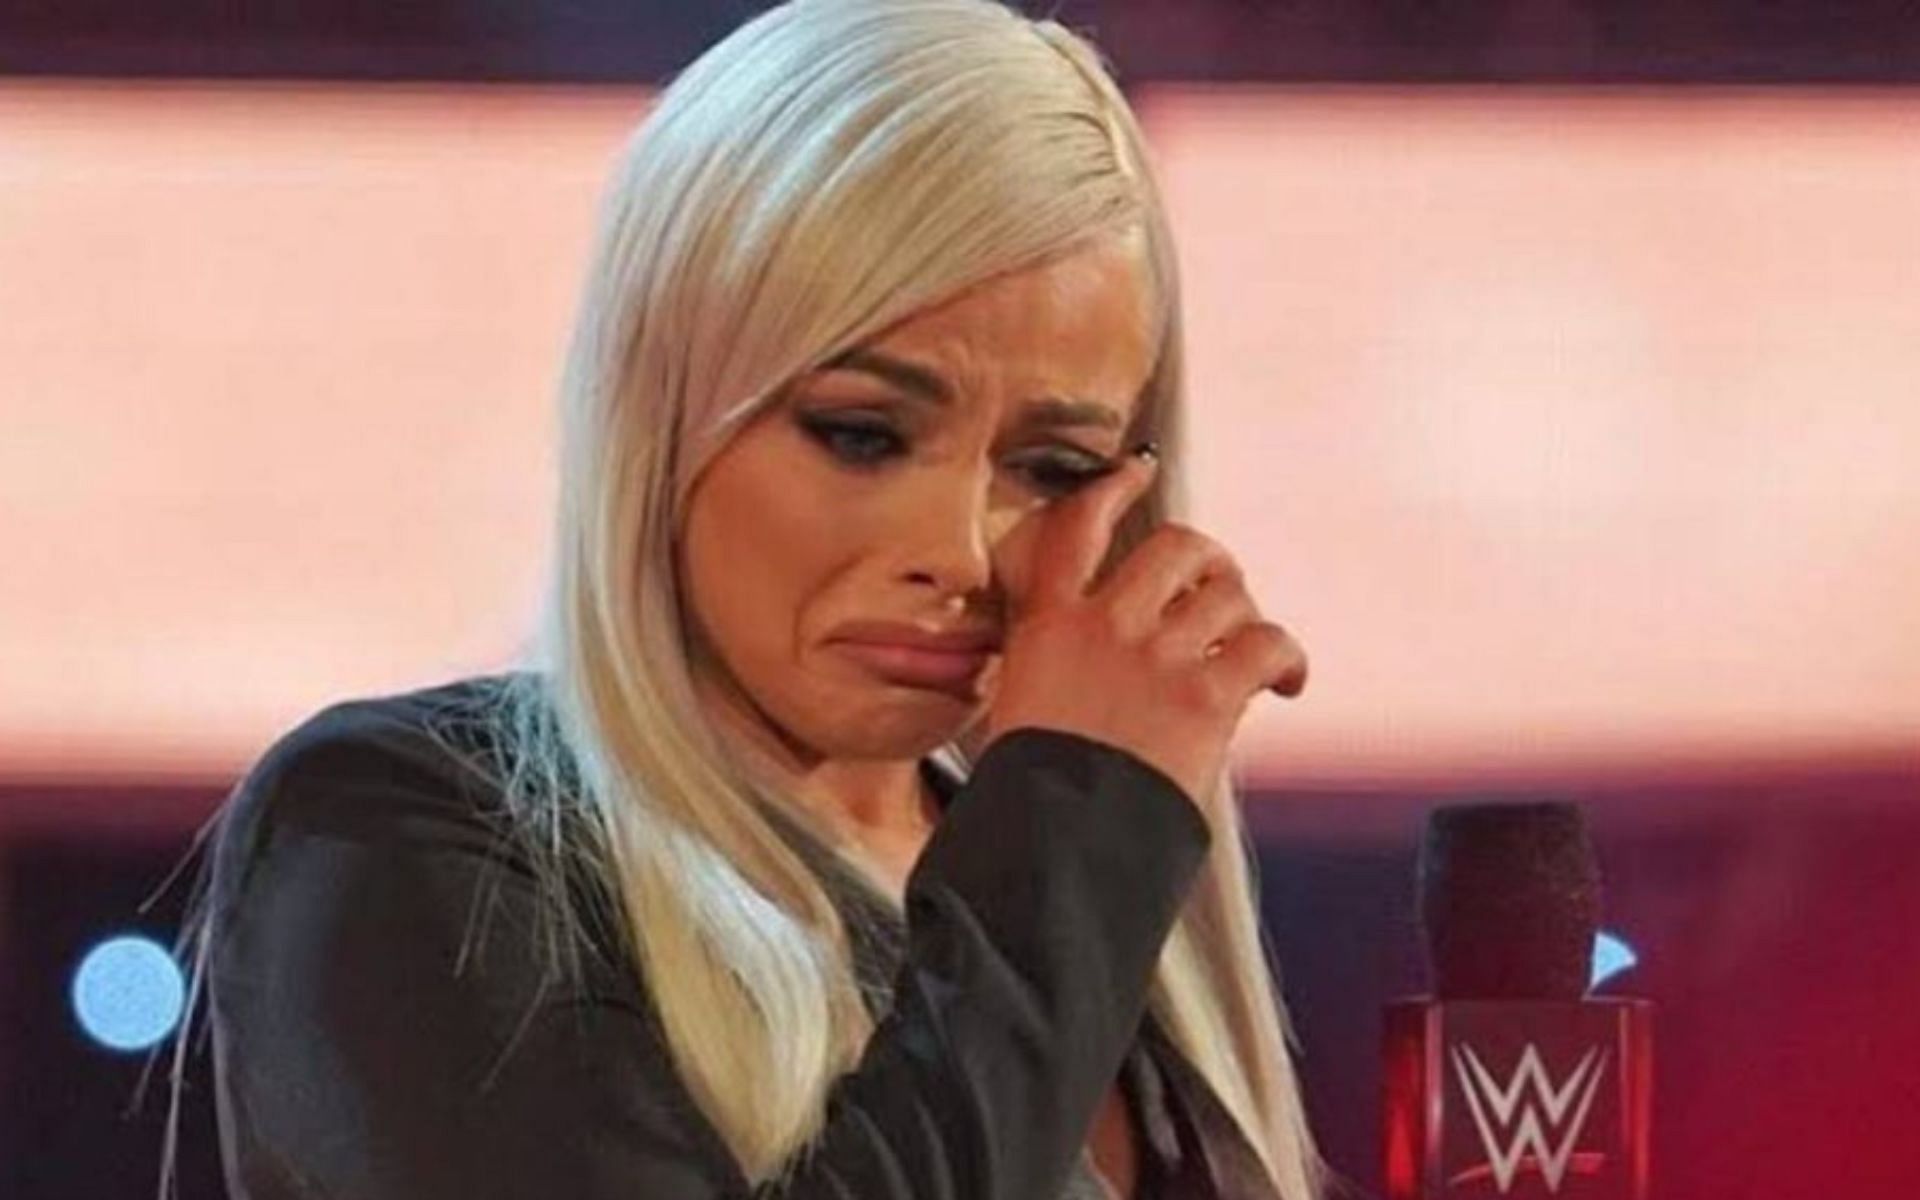 Liv Morgan is the current SmackDown Women